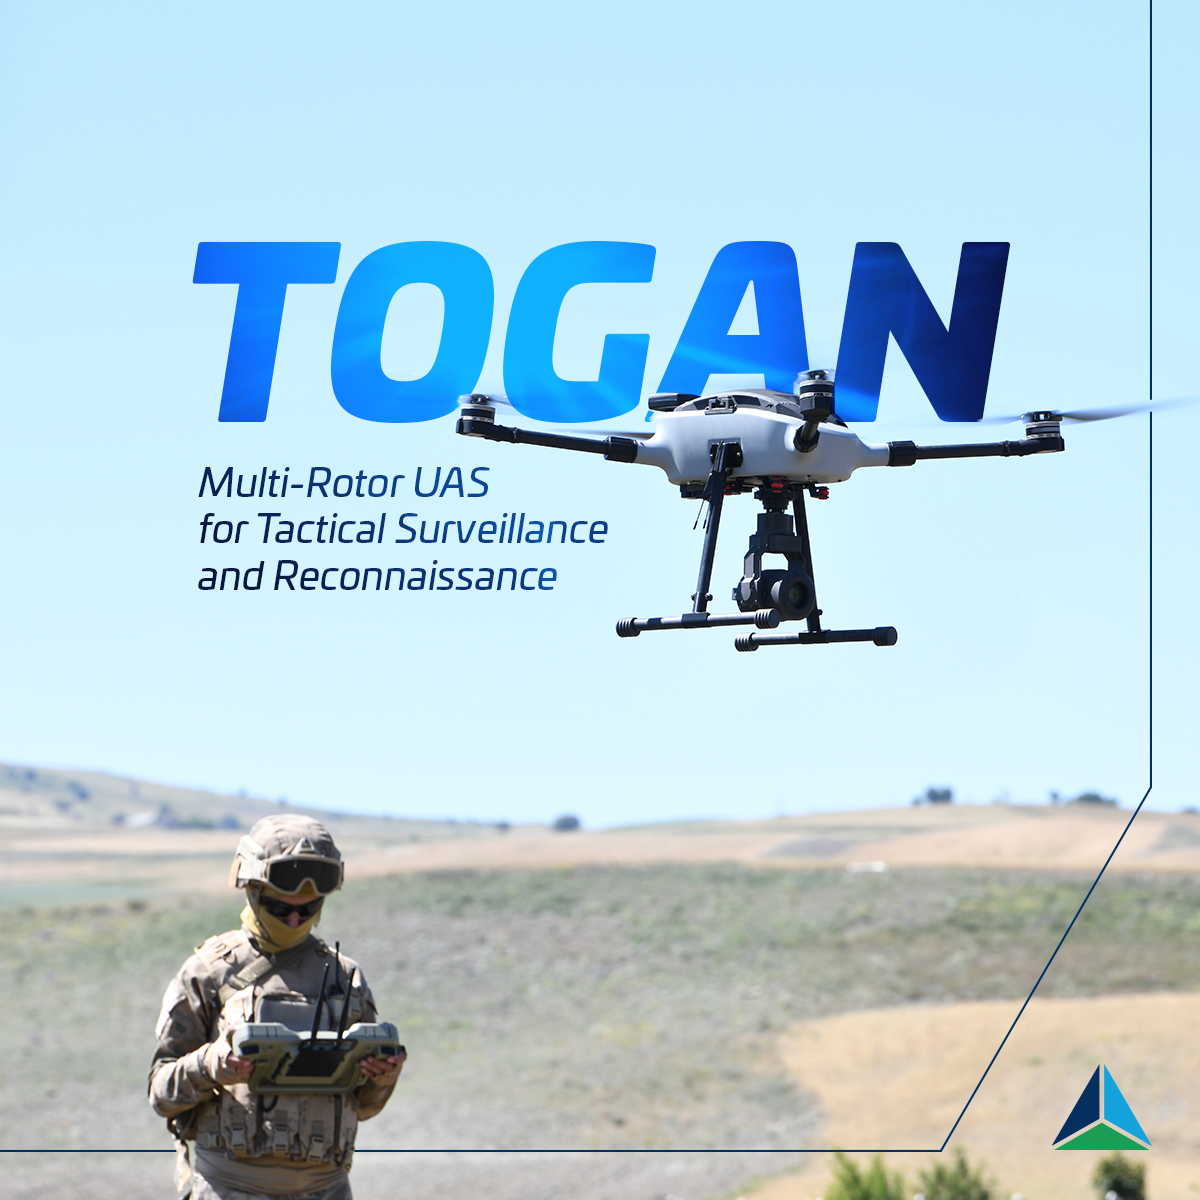 👀It's mission is to see the unseen! #TOGAN 🦅 Equipped to track both fixed and moving targets, #TOGAN excels in tactical reconnaissance and surveillance missions. 🌘 Day and Night Operation 📍Range: 10 km ⏳Endurance: 45 minutes 🔎3 Axis, Stabilised 30x Electro-Optical POD